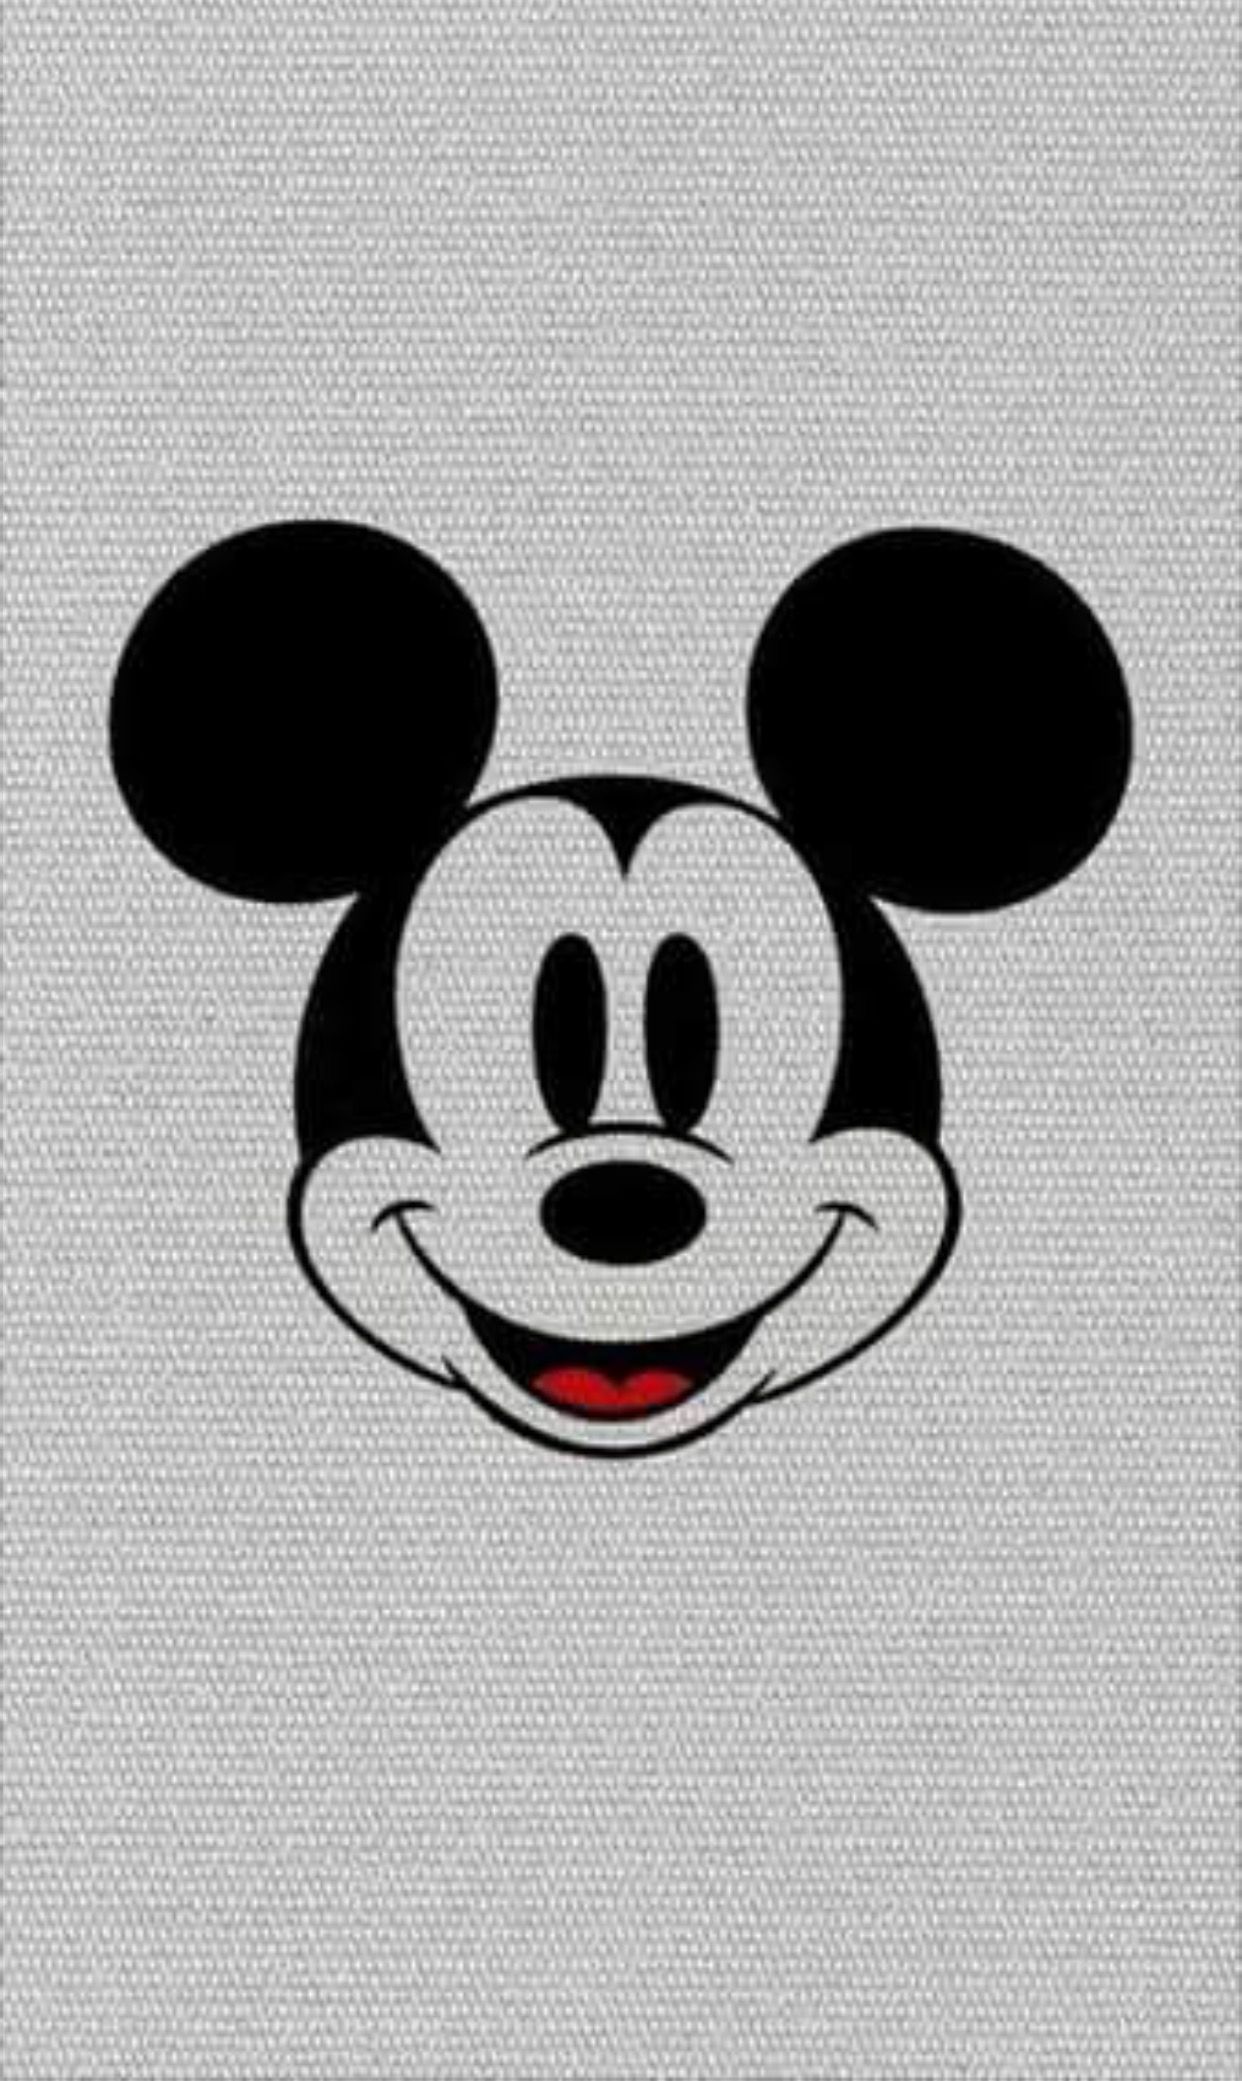 Mickey Mouse Face Wallpaper Free Mickey Mouse Face Background